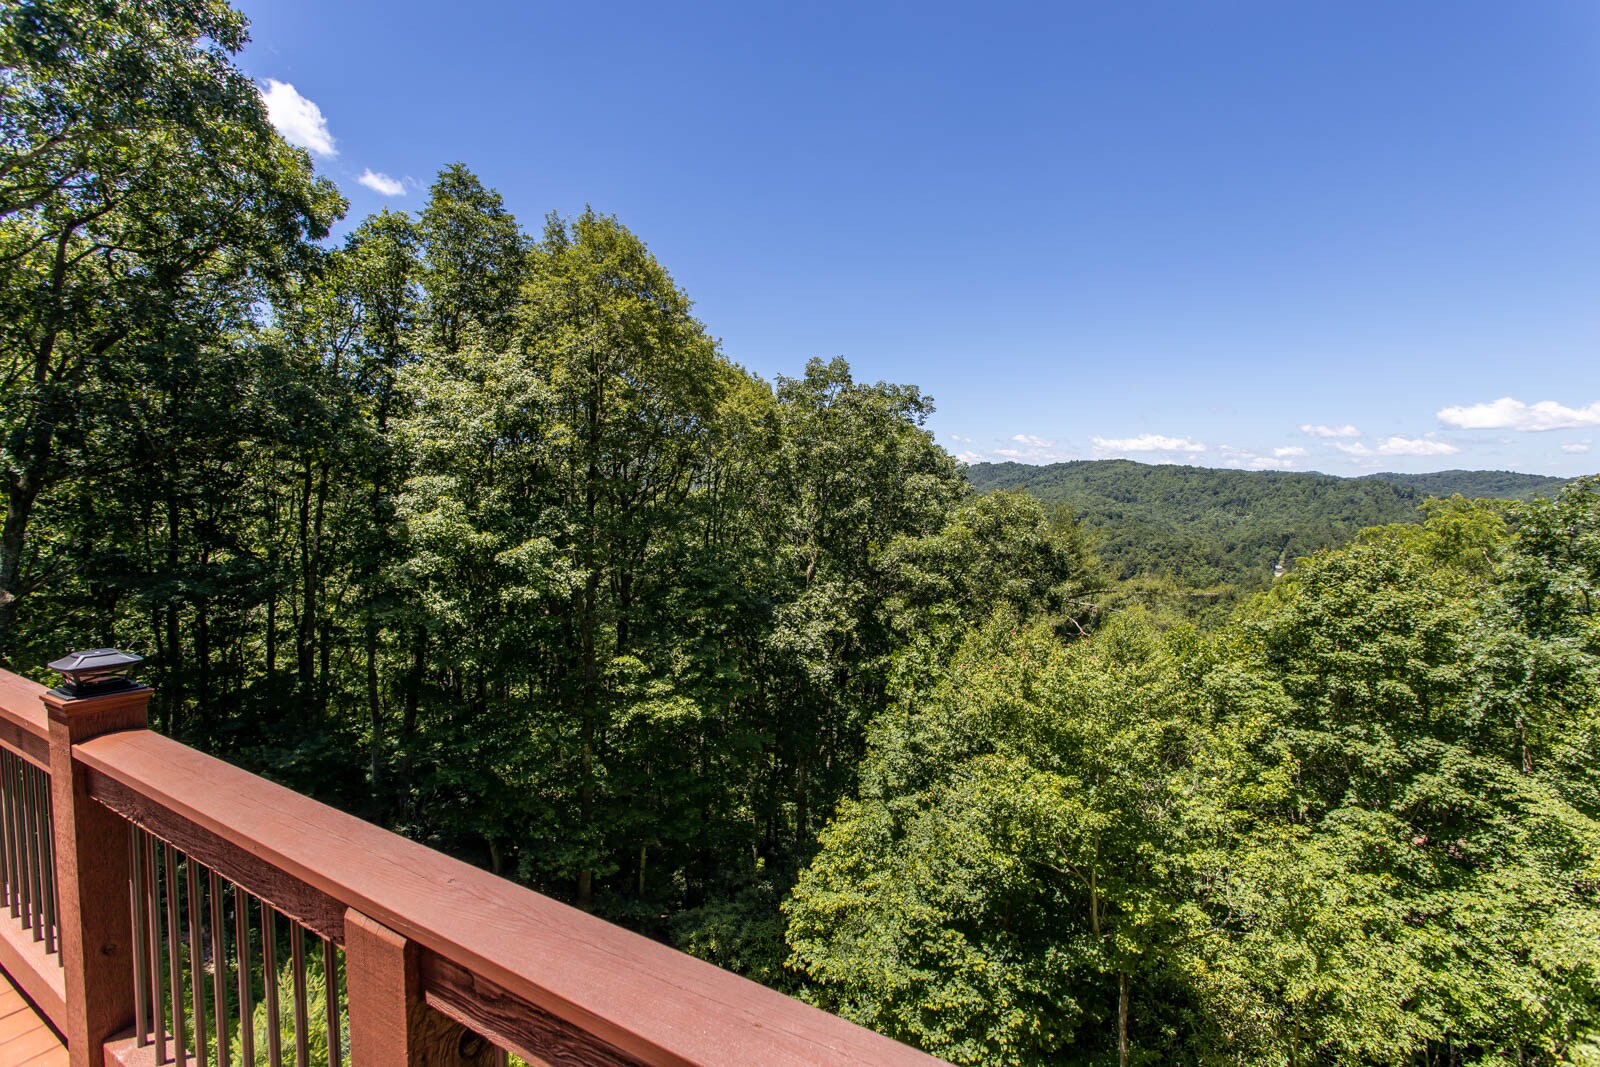 Long Range Mountain Views from the Deck